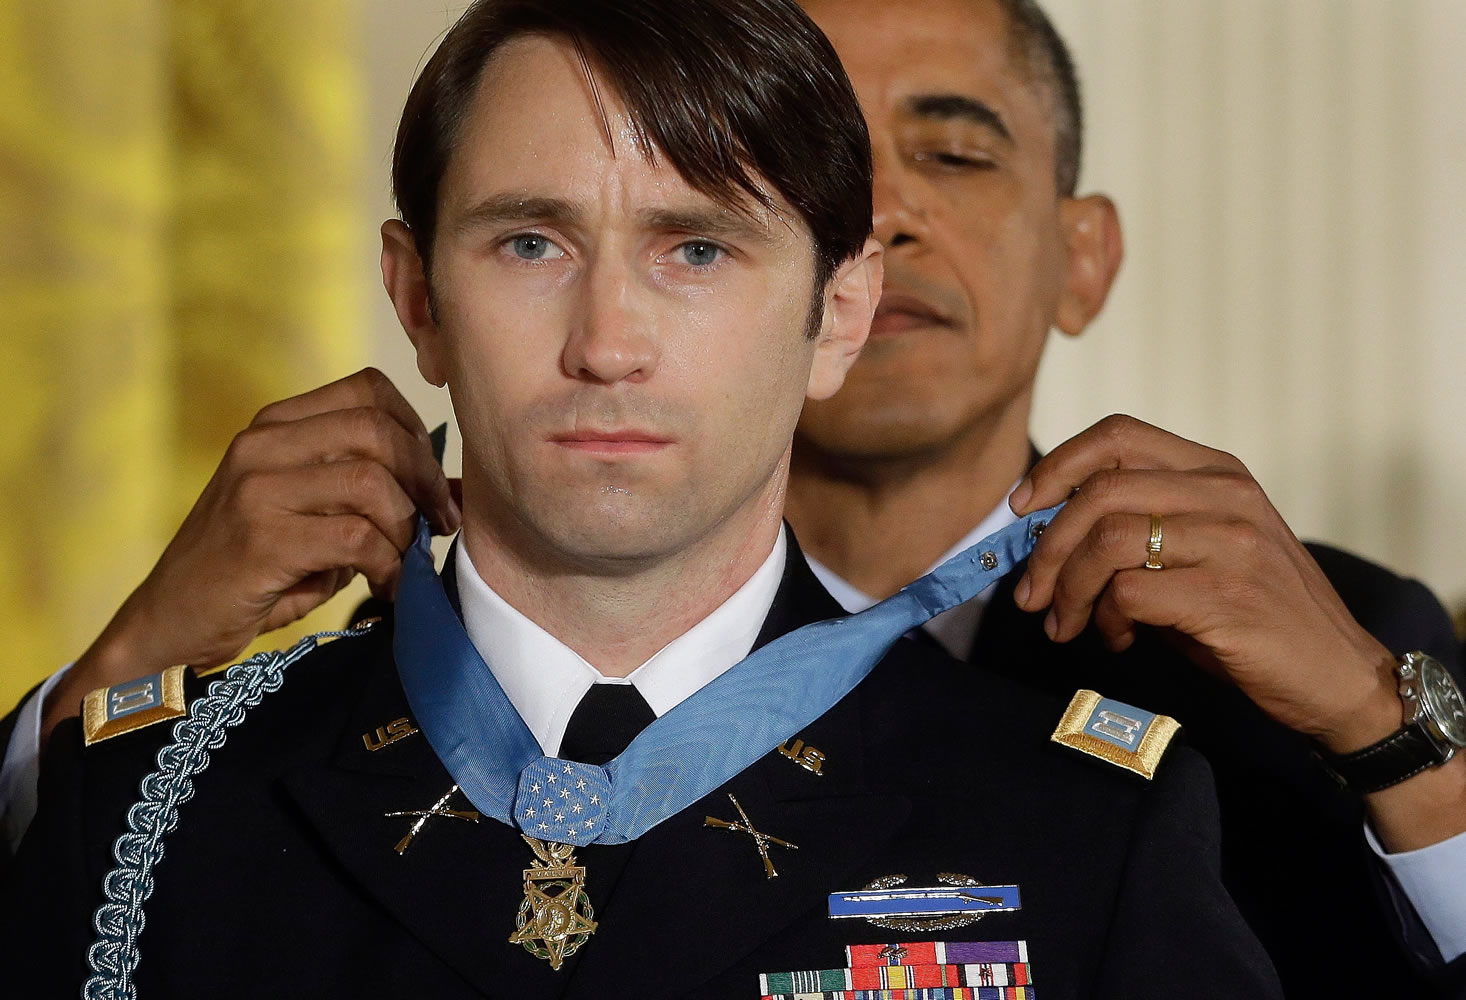 President Barack Obama awards the Medal of Honor to former Army Capt. William D.